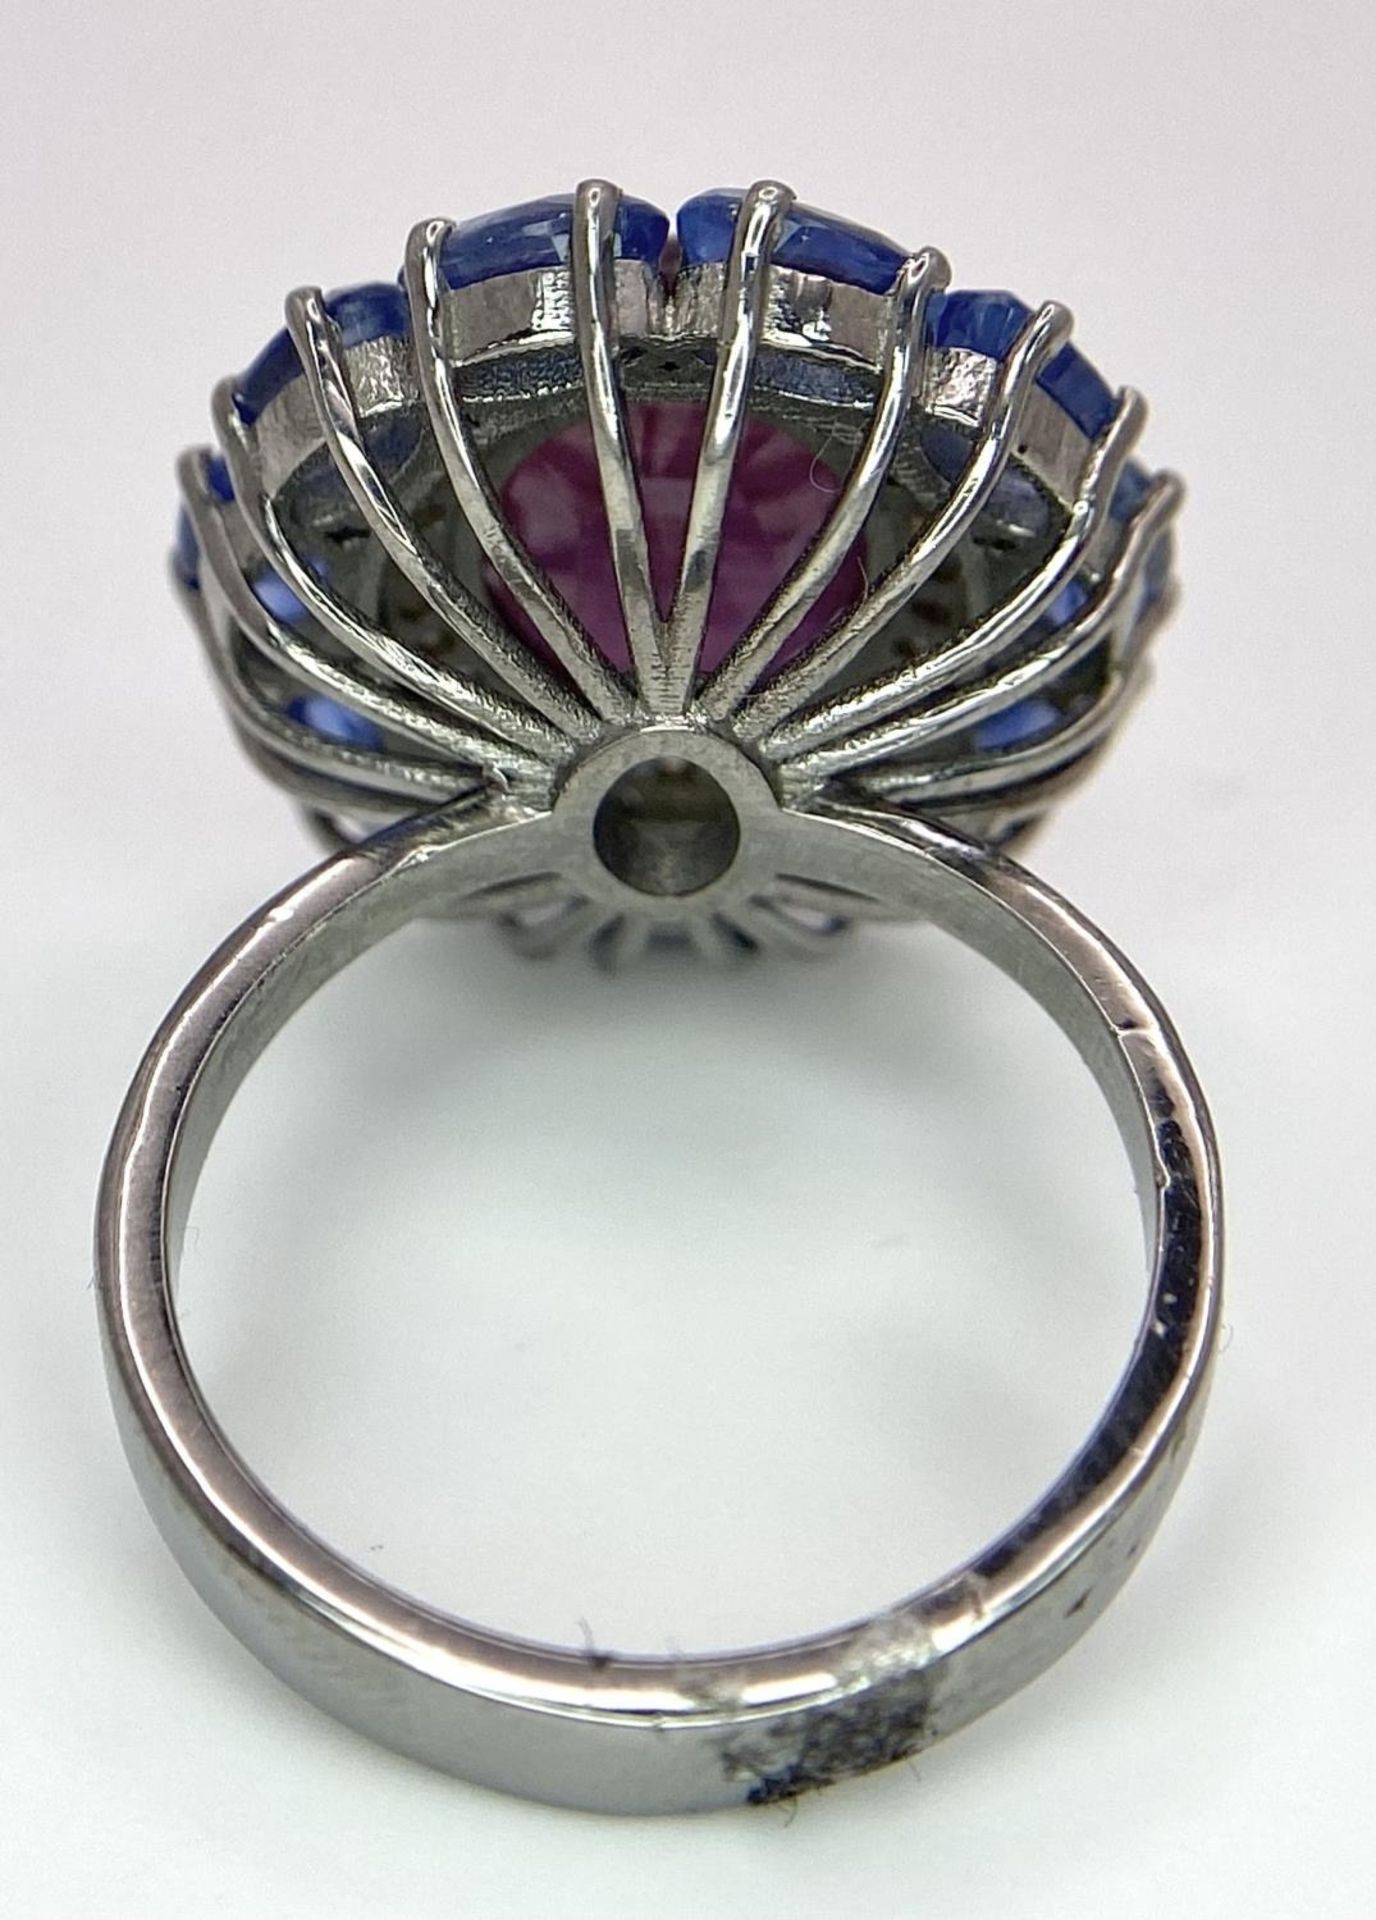 A 5.65ct Ruby Dress Ring with Halo of 0.40ctw of Diamonds and 3.70ct of Kyanite Stones. Set in 925 - Bild 4 aus 7